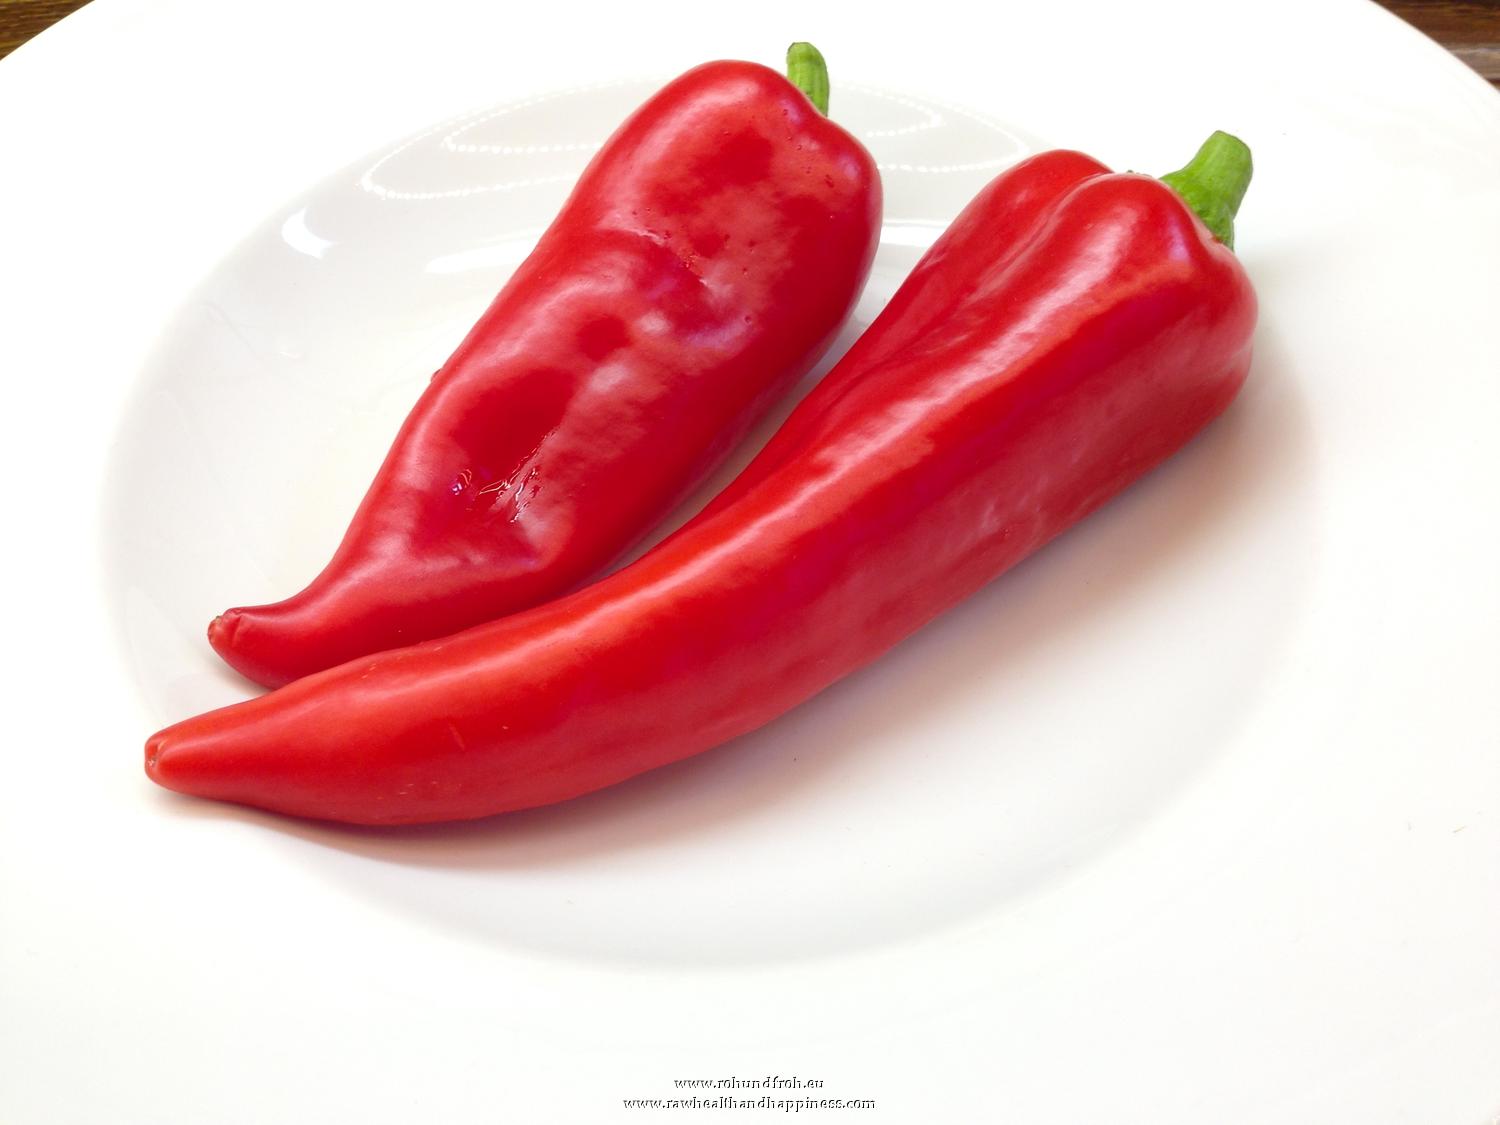 Sweet red pepper / Fruits and Veggies - Raw Health and Happiness